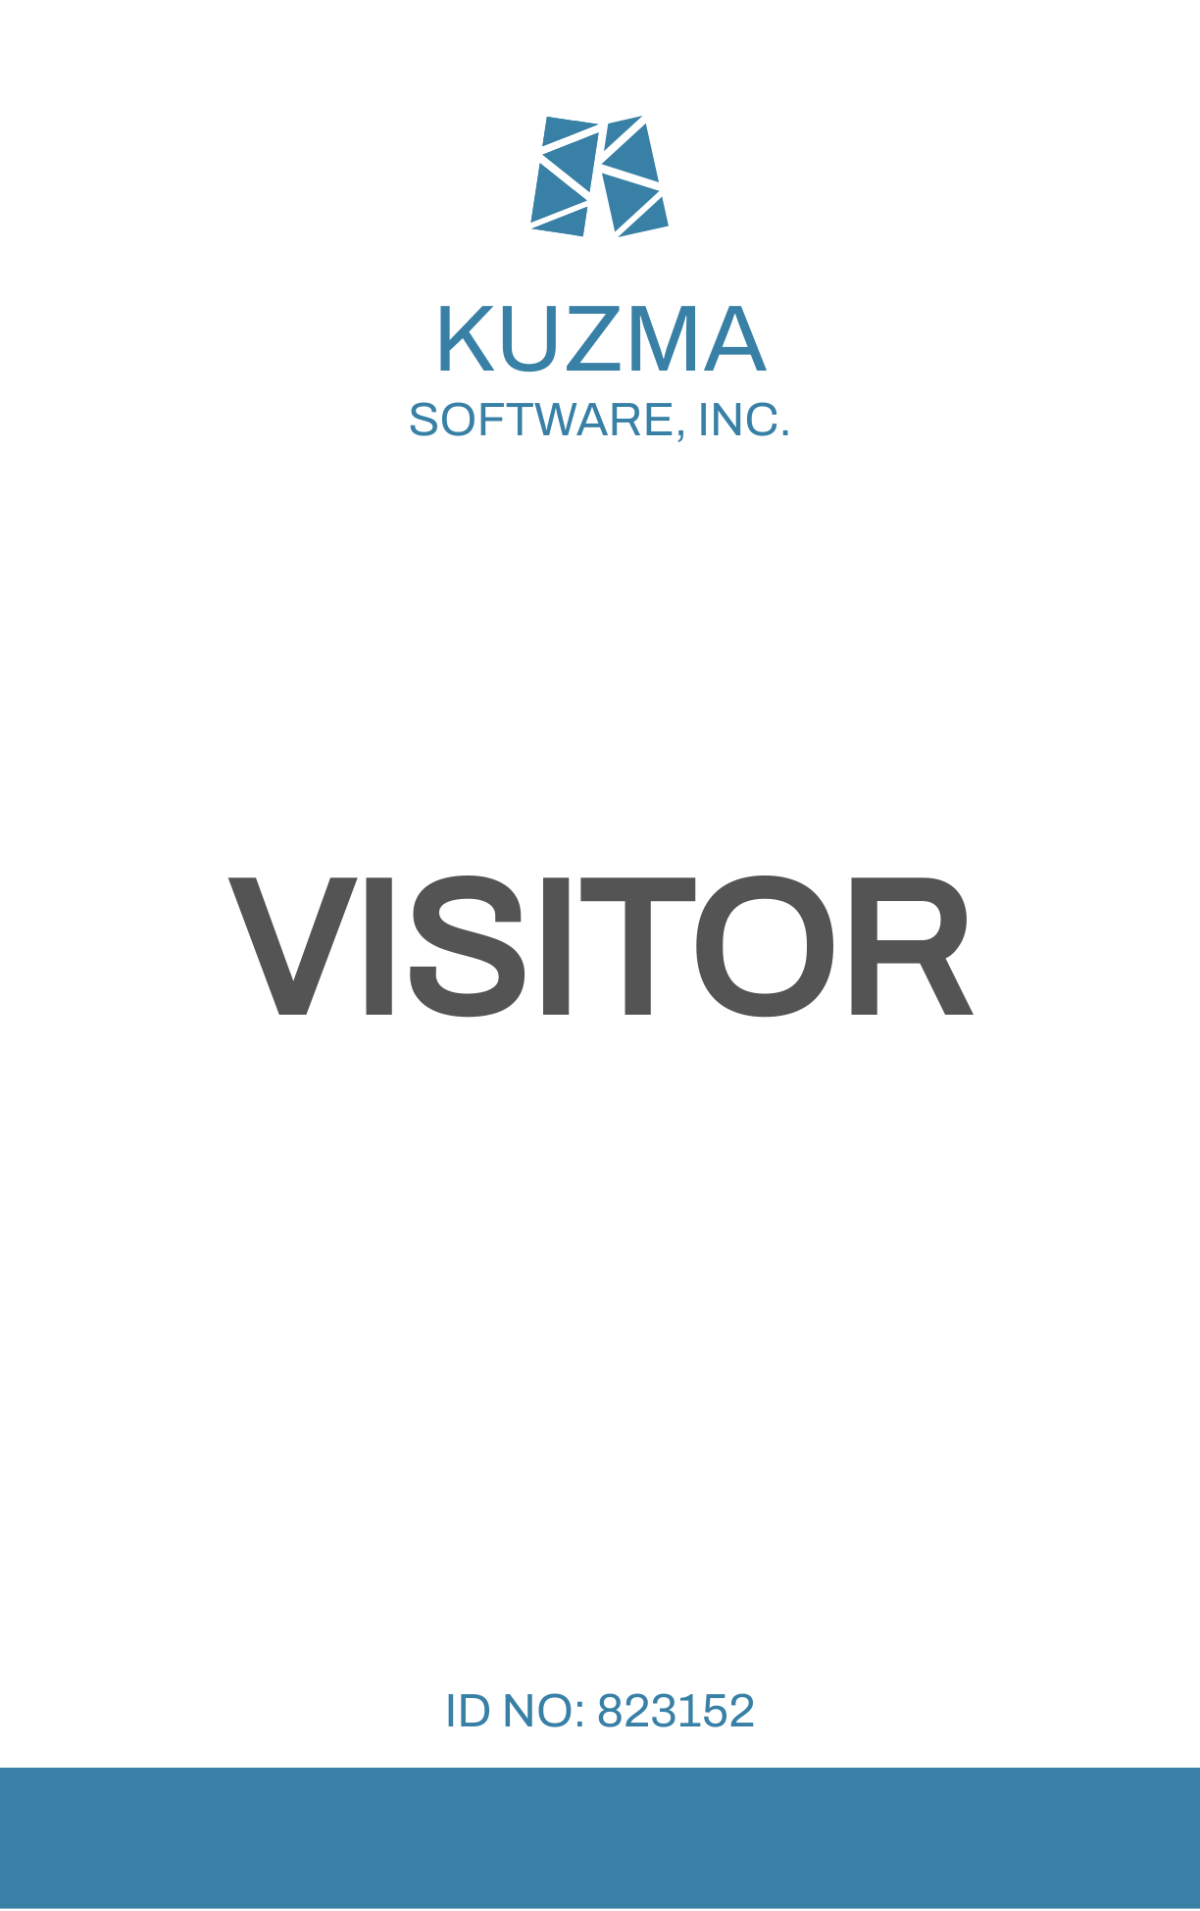 IT Company Visitor ID Card Template